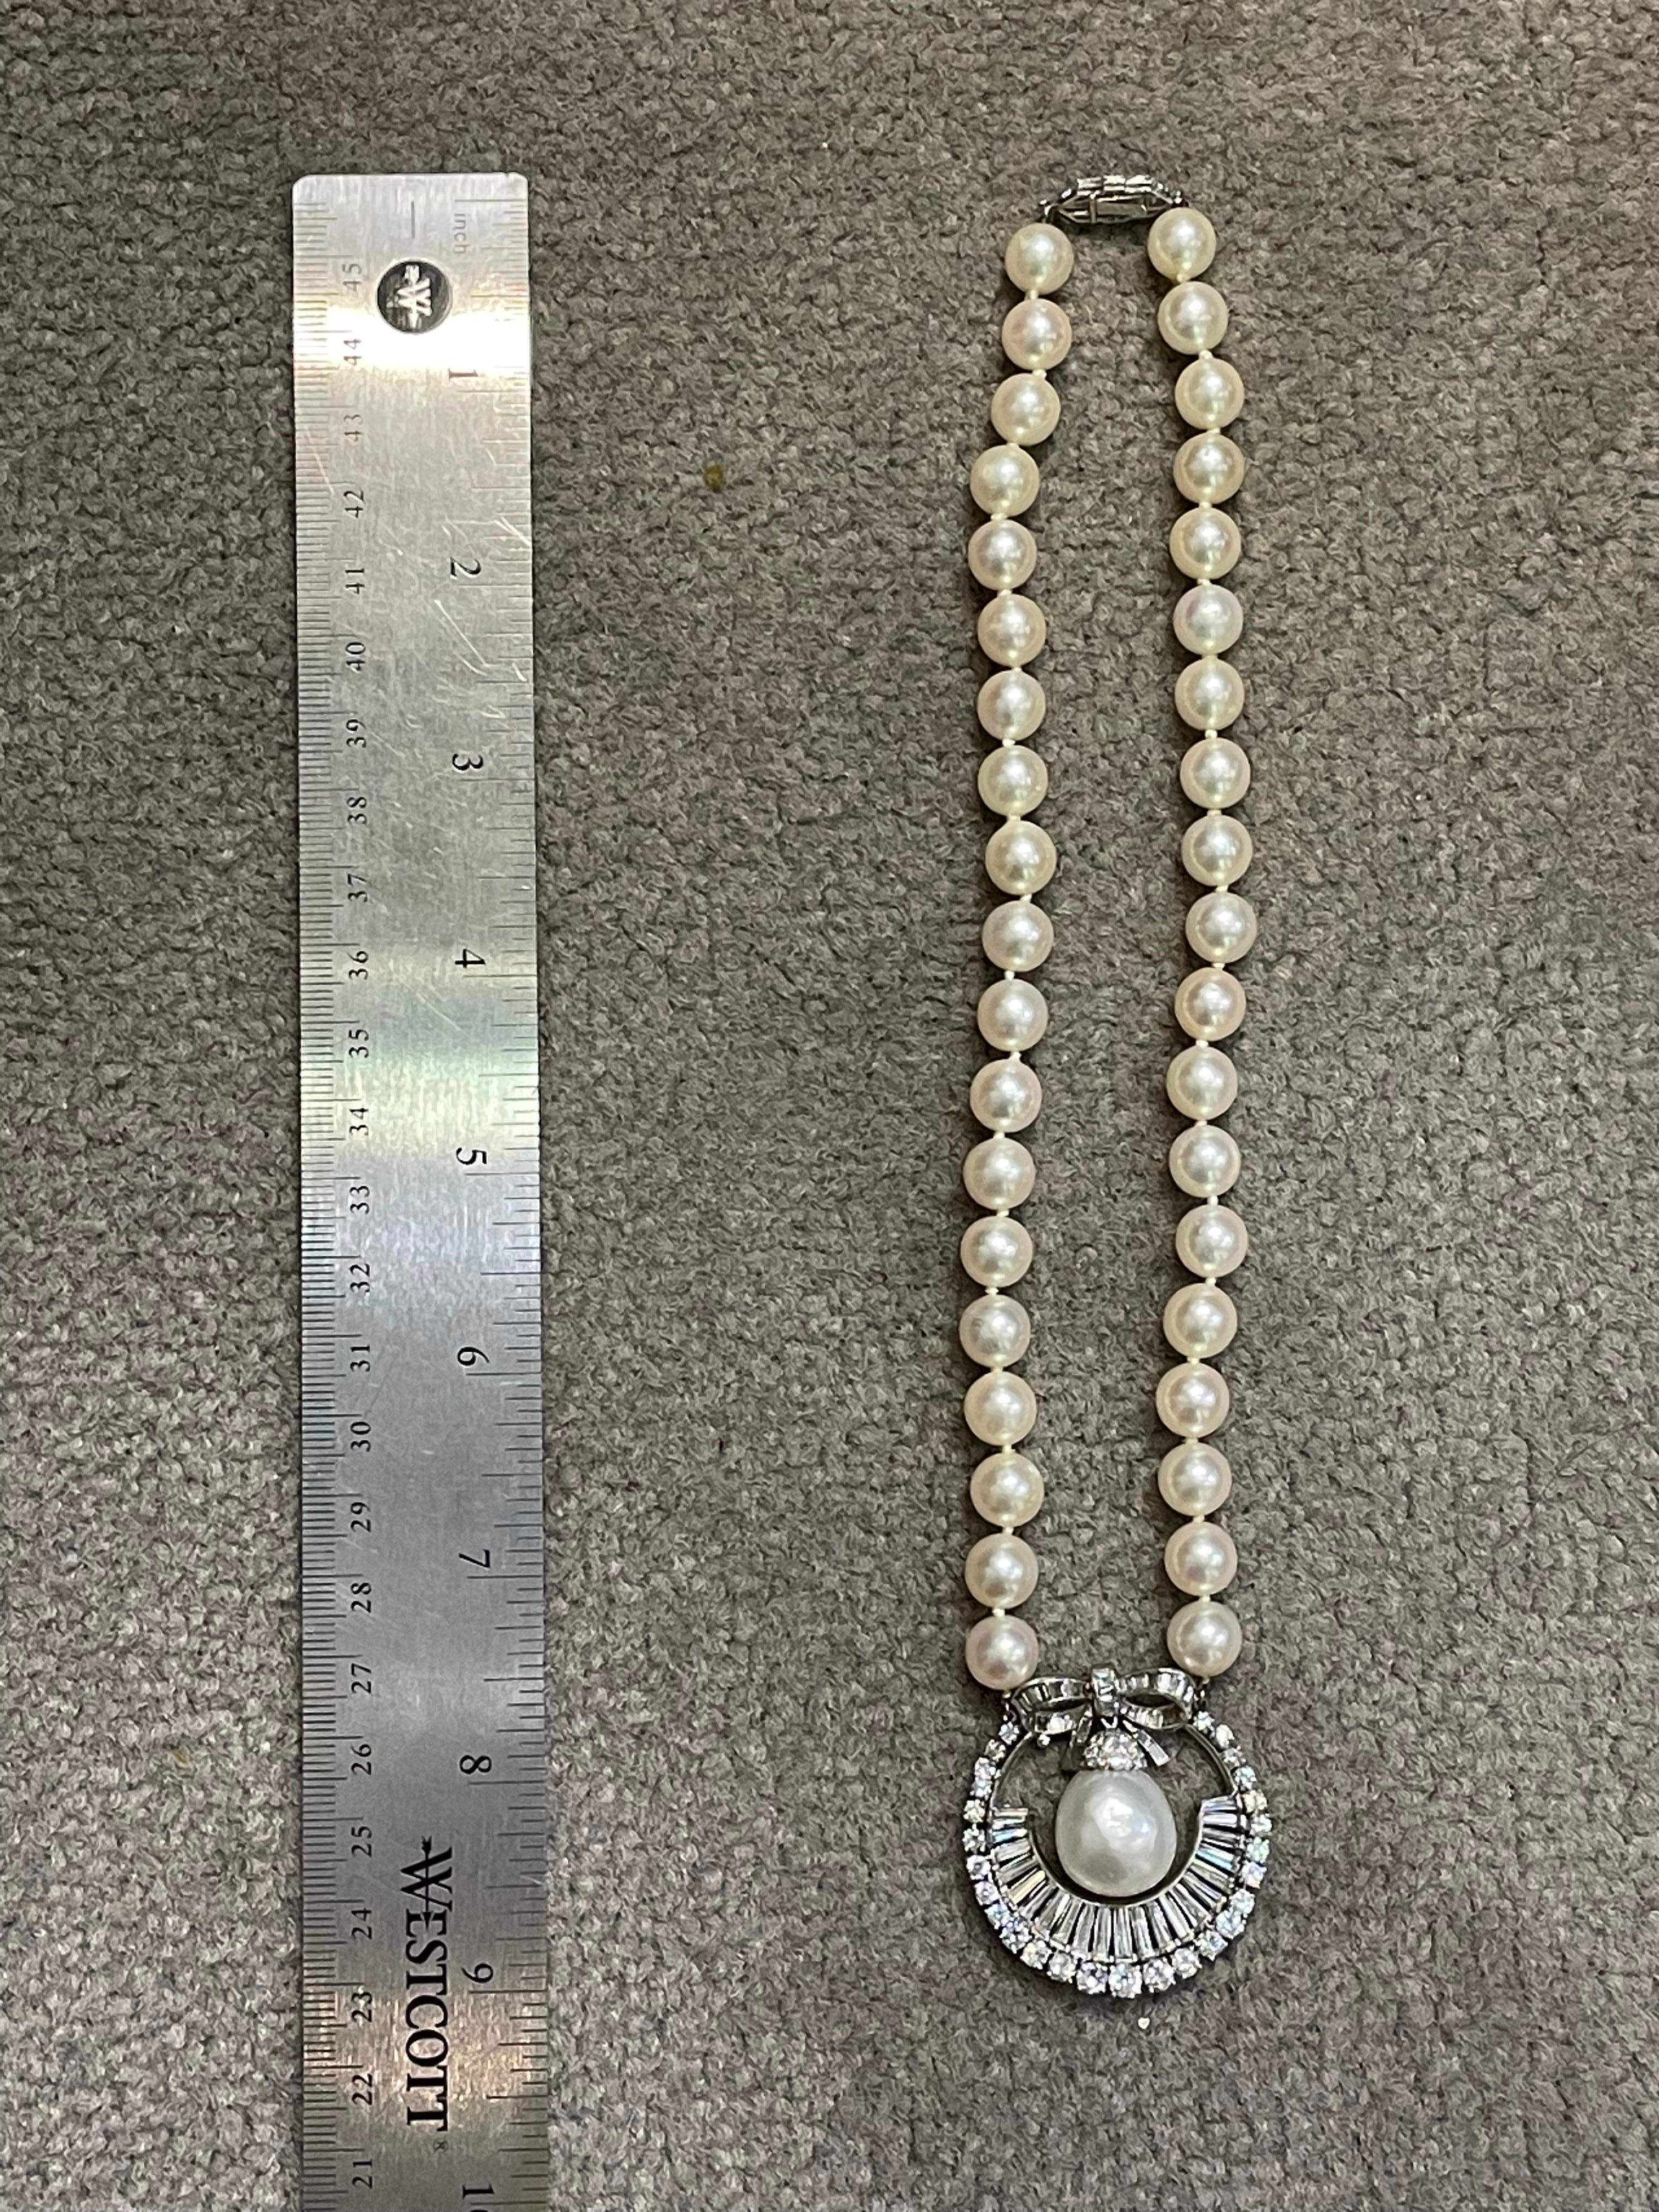 Pearl Pendant Necklace In Excellent Condition For Sale In New York, NY